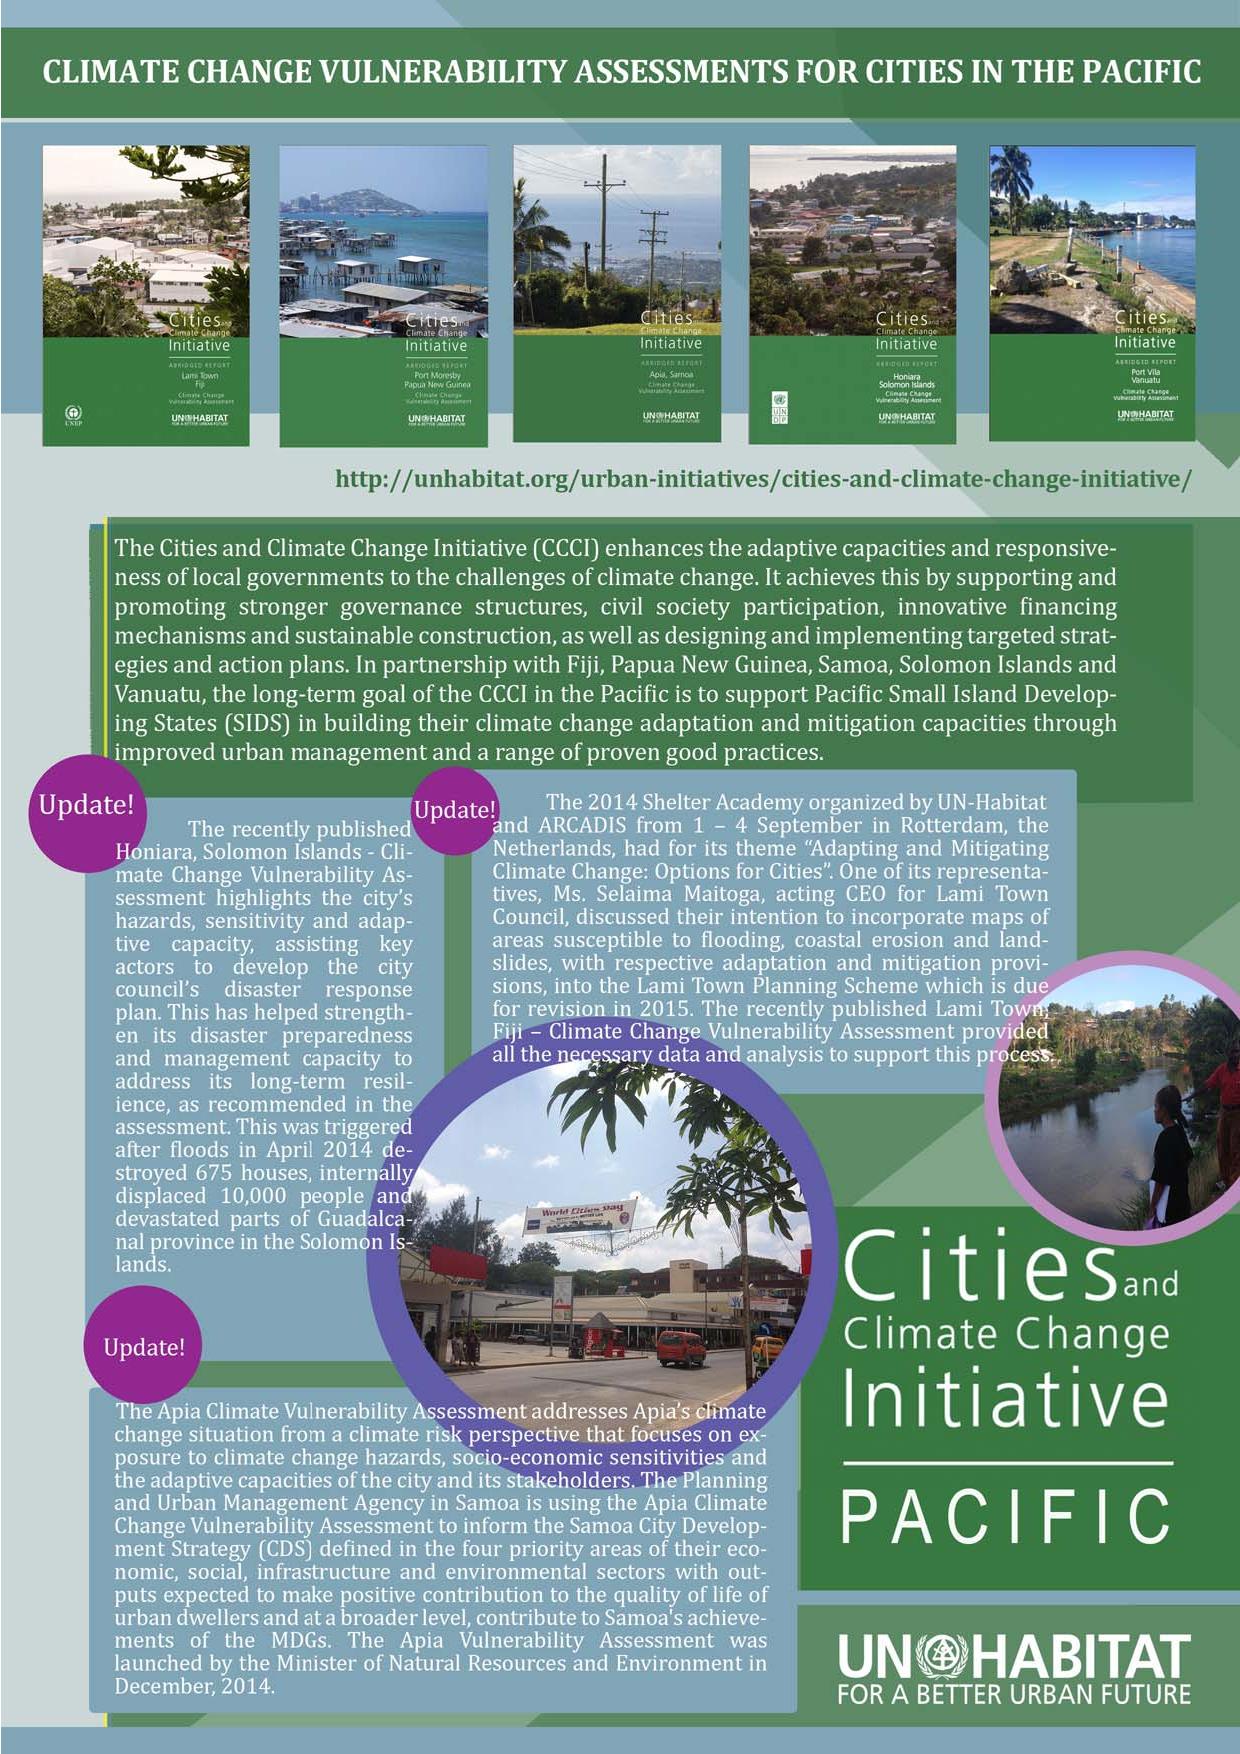 Cities and Climate Change Initiative in the Pacific (January 2015)